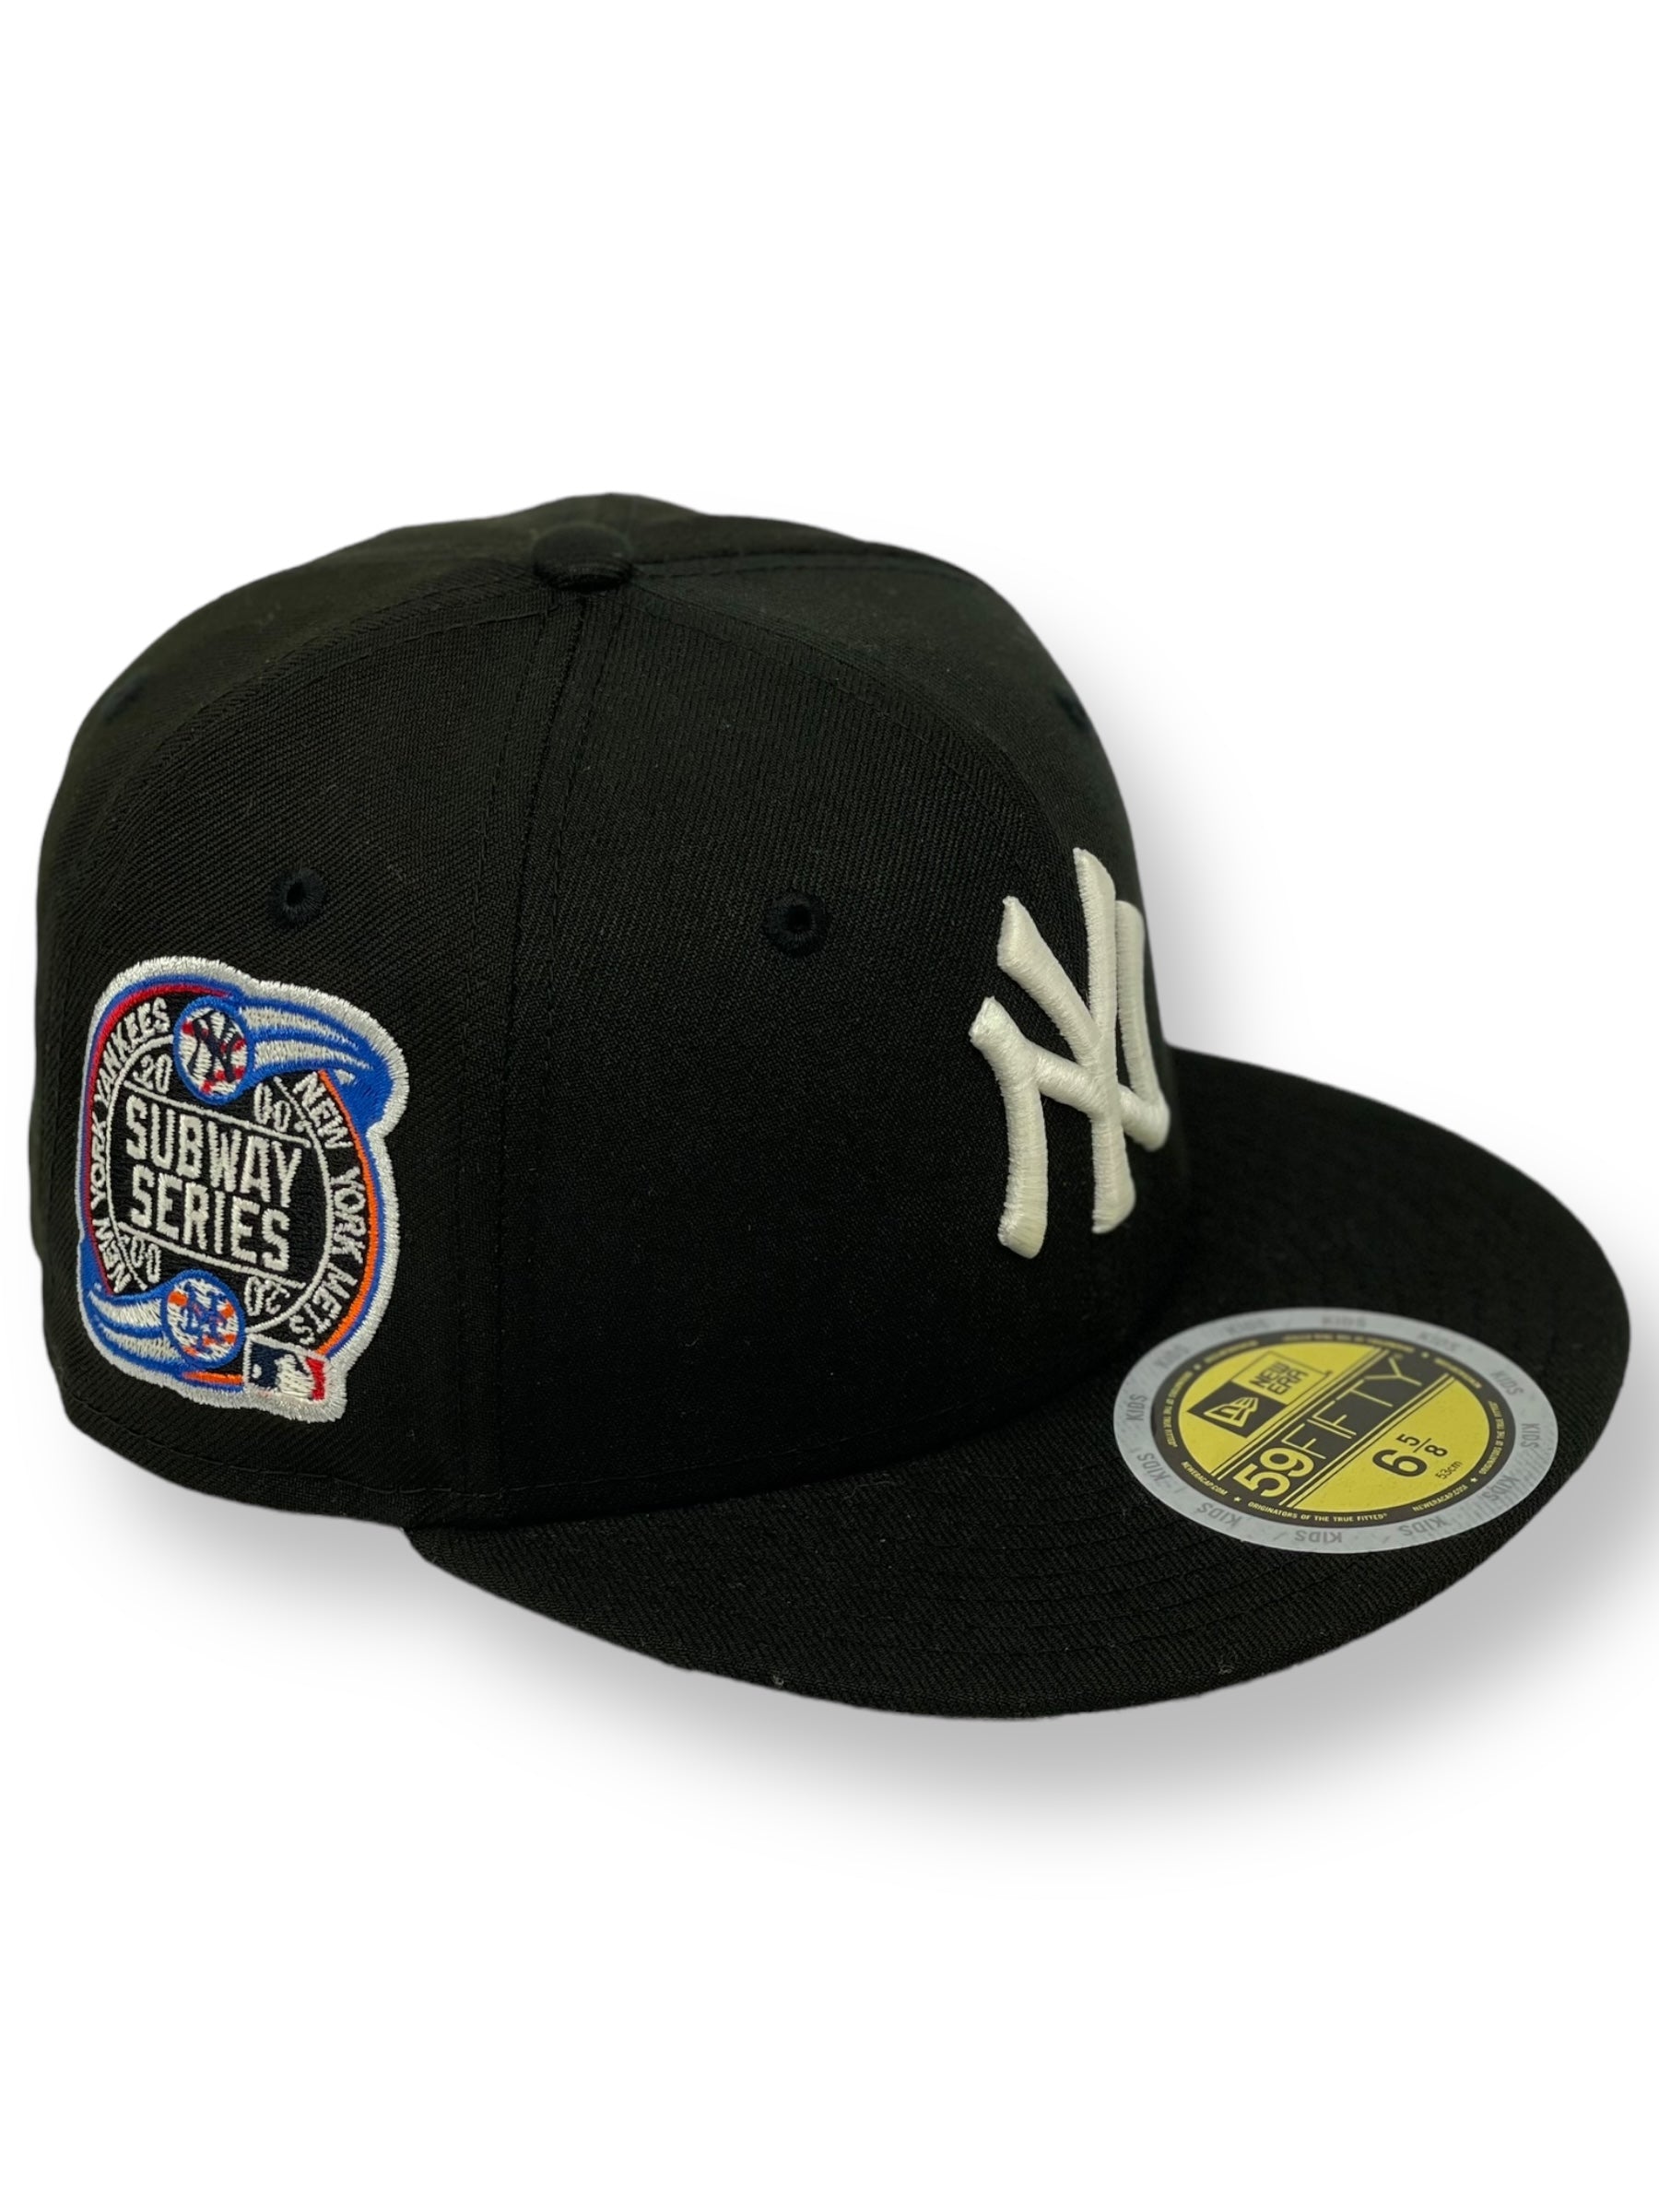 "KIDS" NEW YORK YANKEES "2000 SUBWAY SERIES" NEW ERA 59FIFTY FITTED